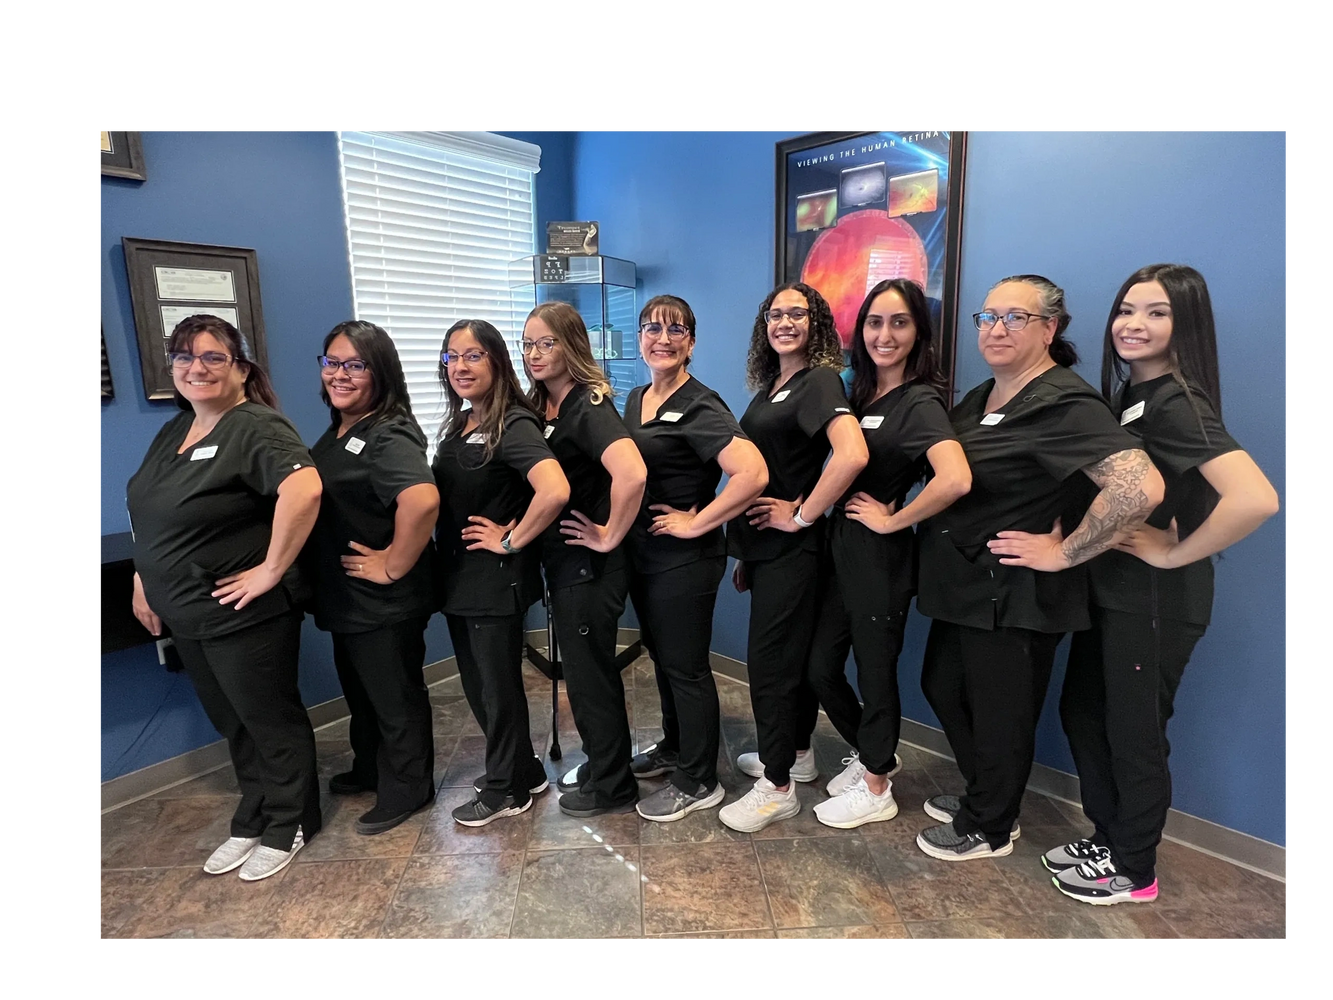 My team and I are excited  to help with all your vision care needs!